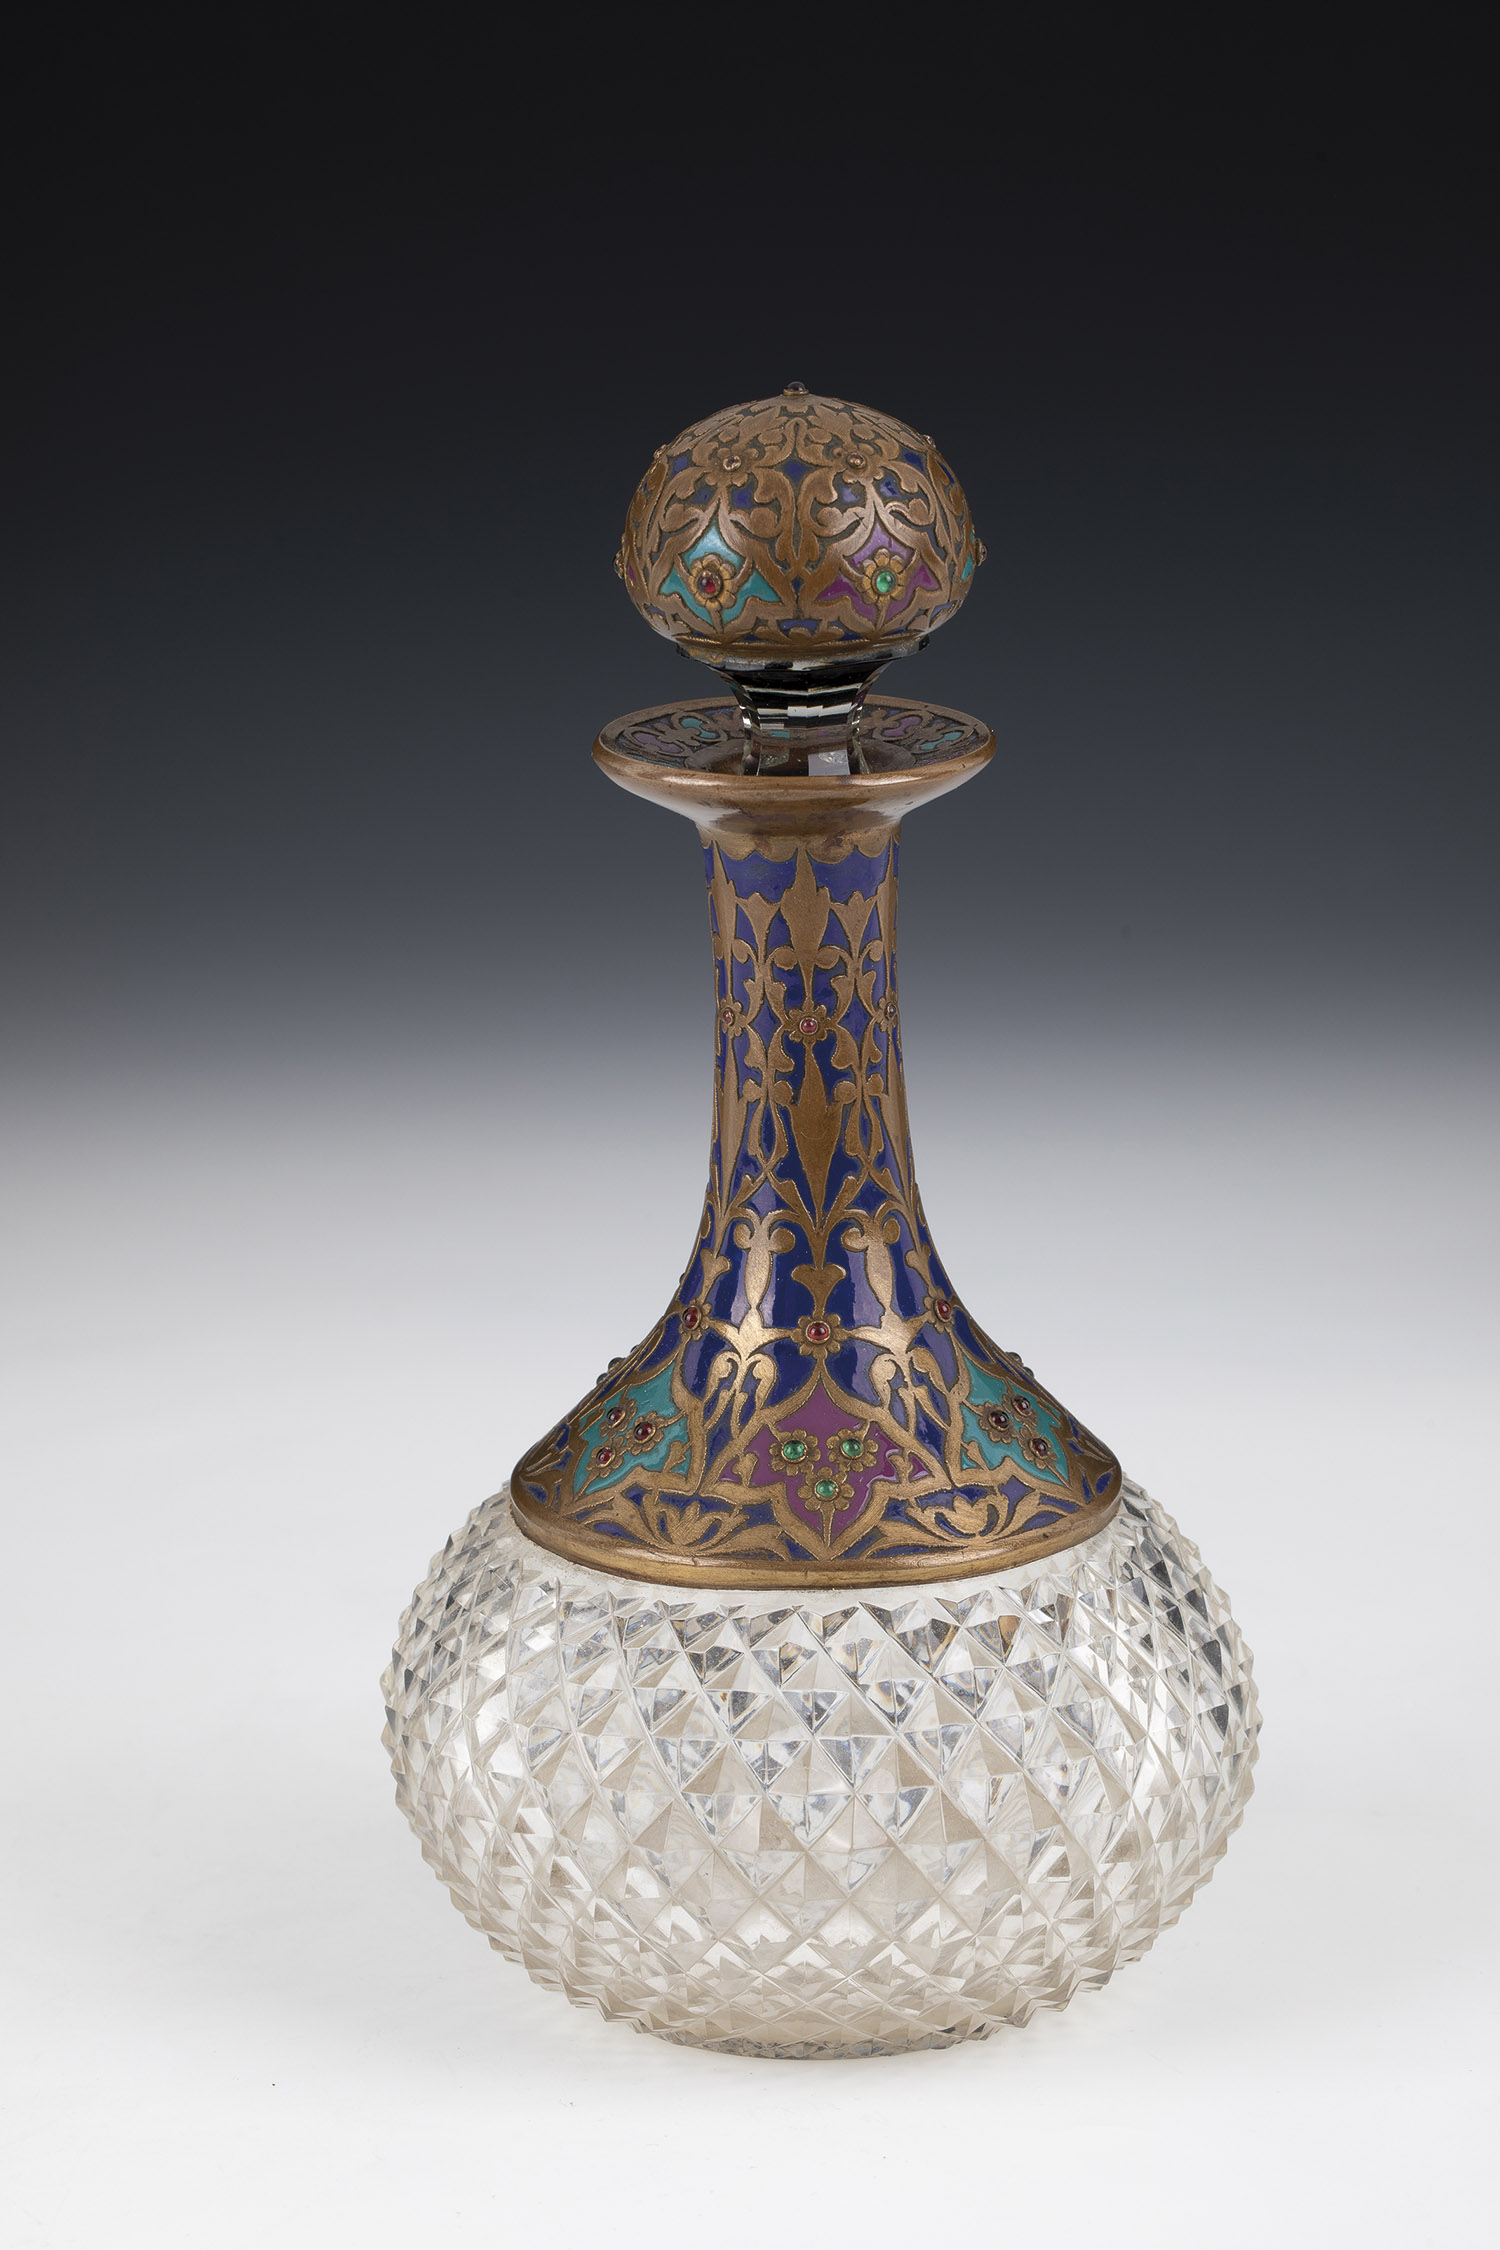 Bottle with stopper France or Russia, 19th century Colourless glass with stone cut. Neck and stopper